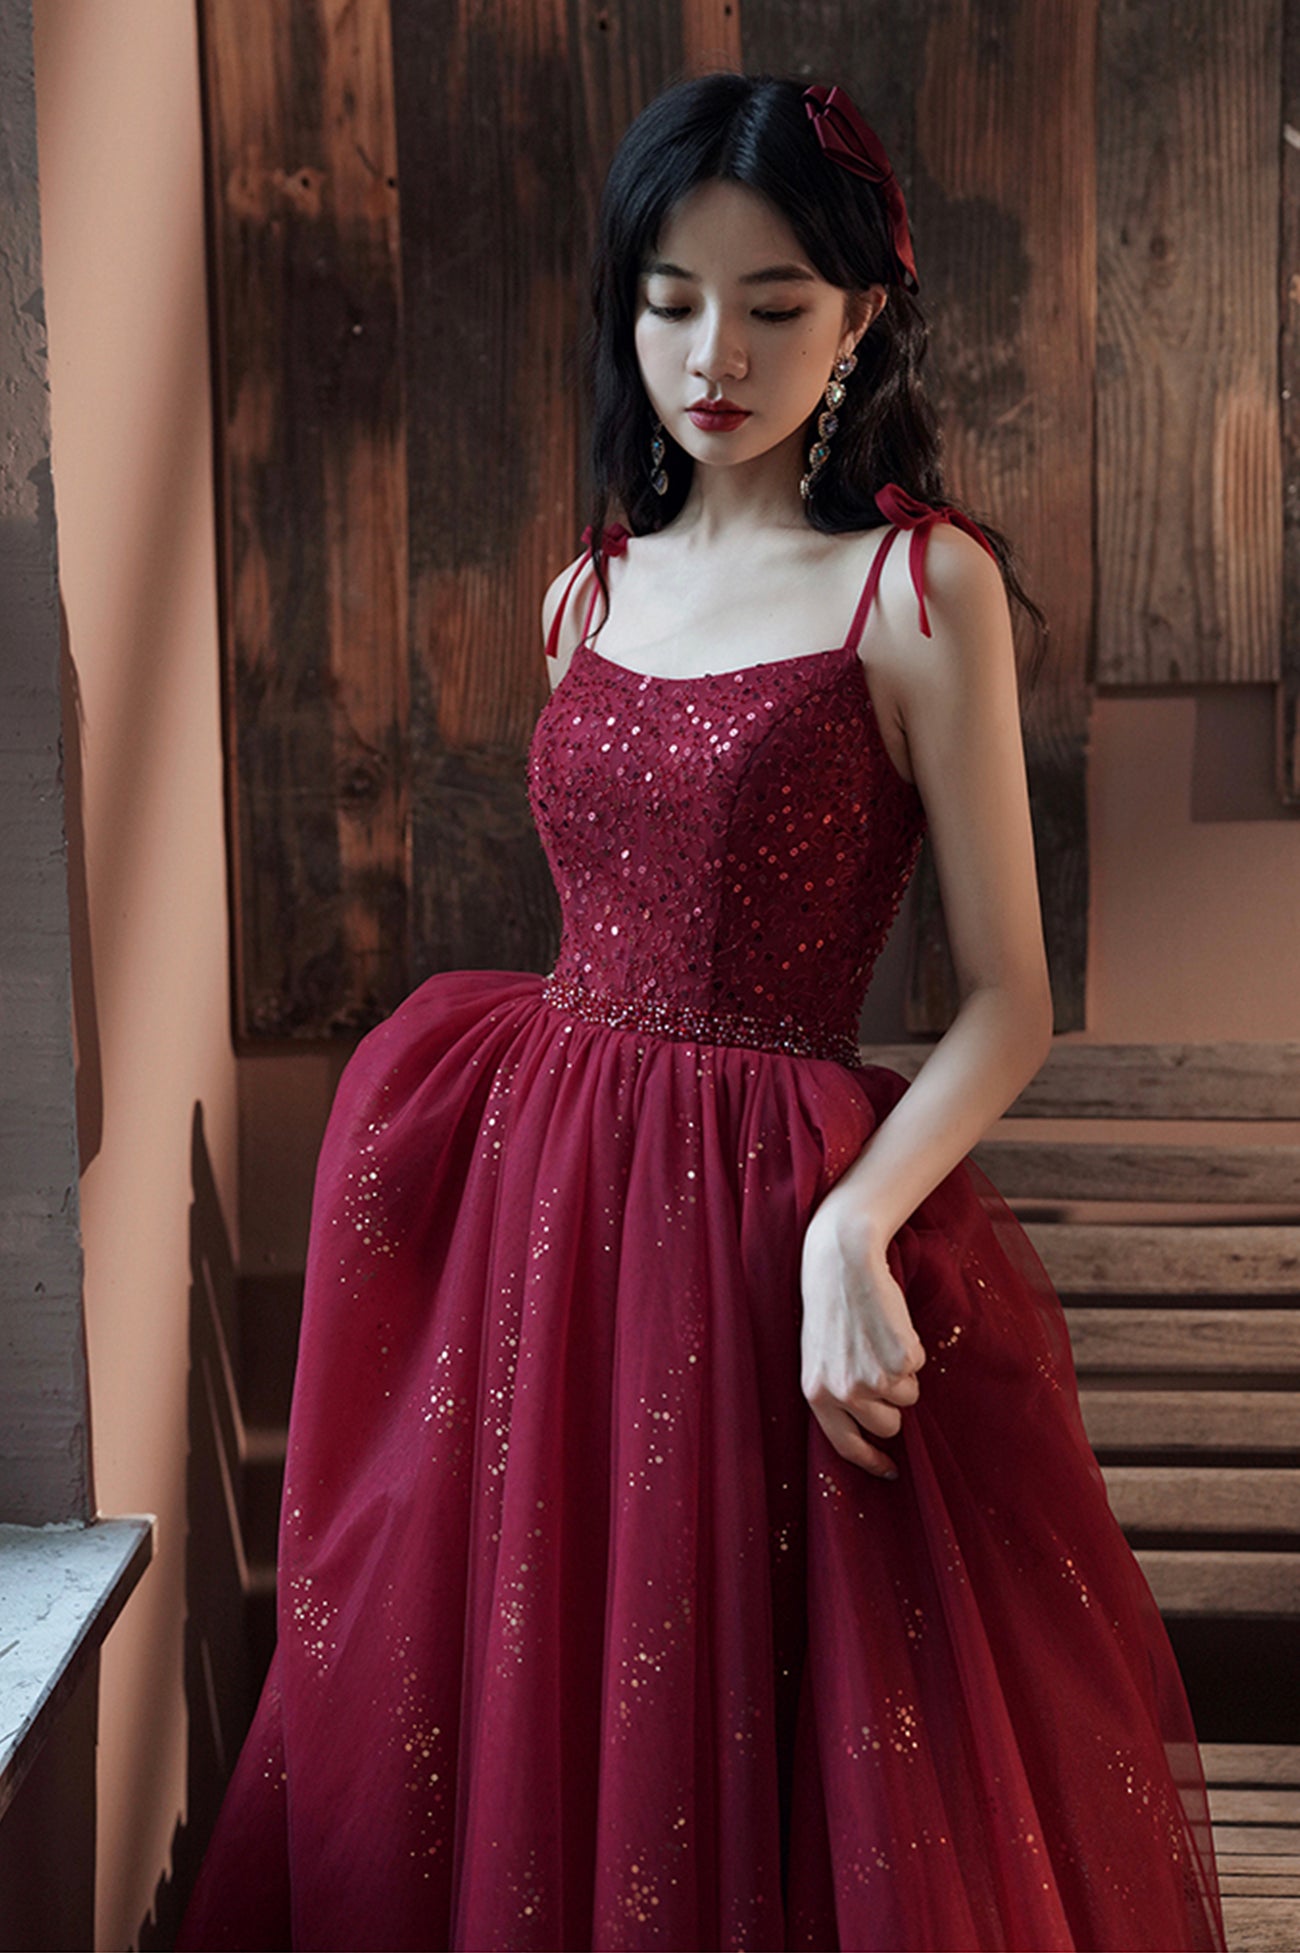 Burgundy Tulle Sequins Long Prom Dress, Spaghetti Straps Evening Party Dress